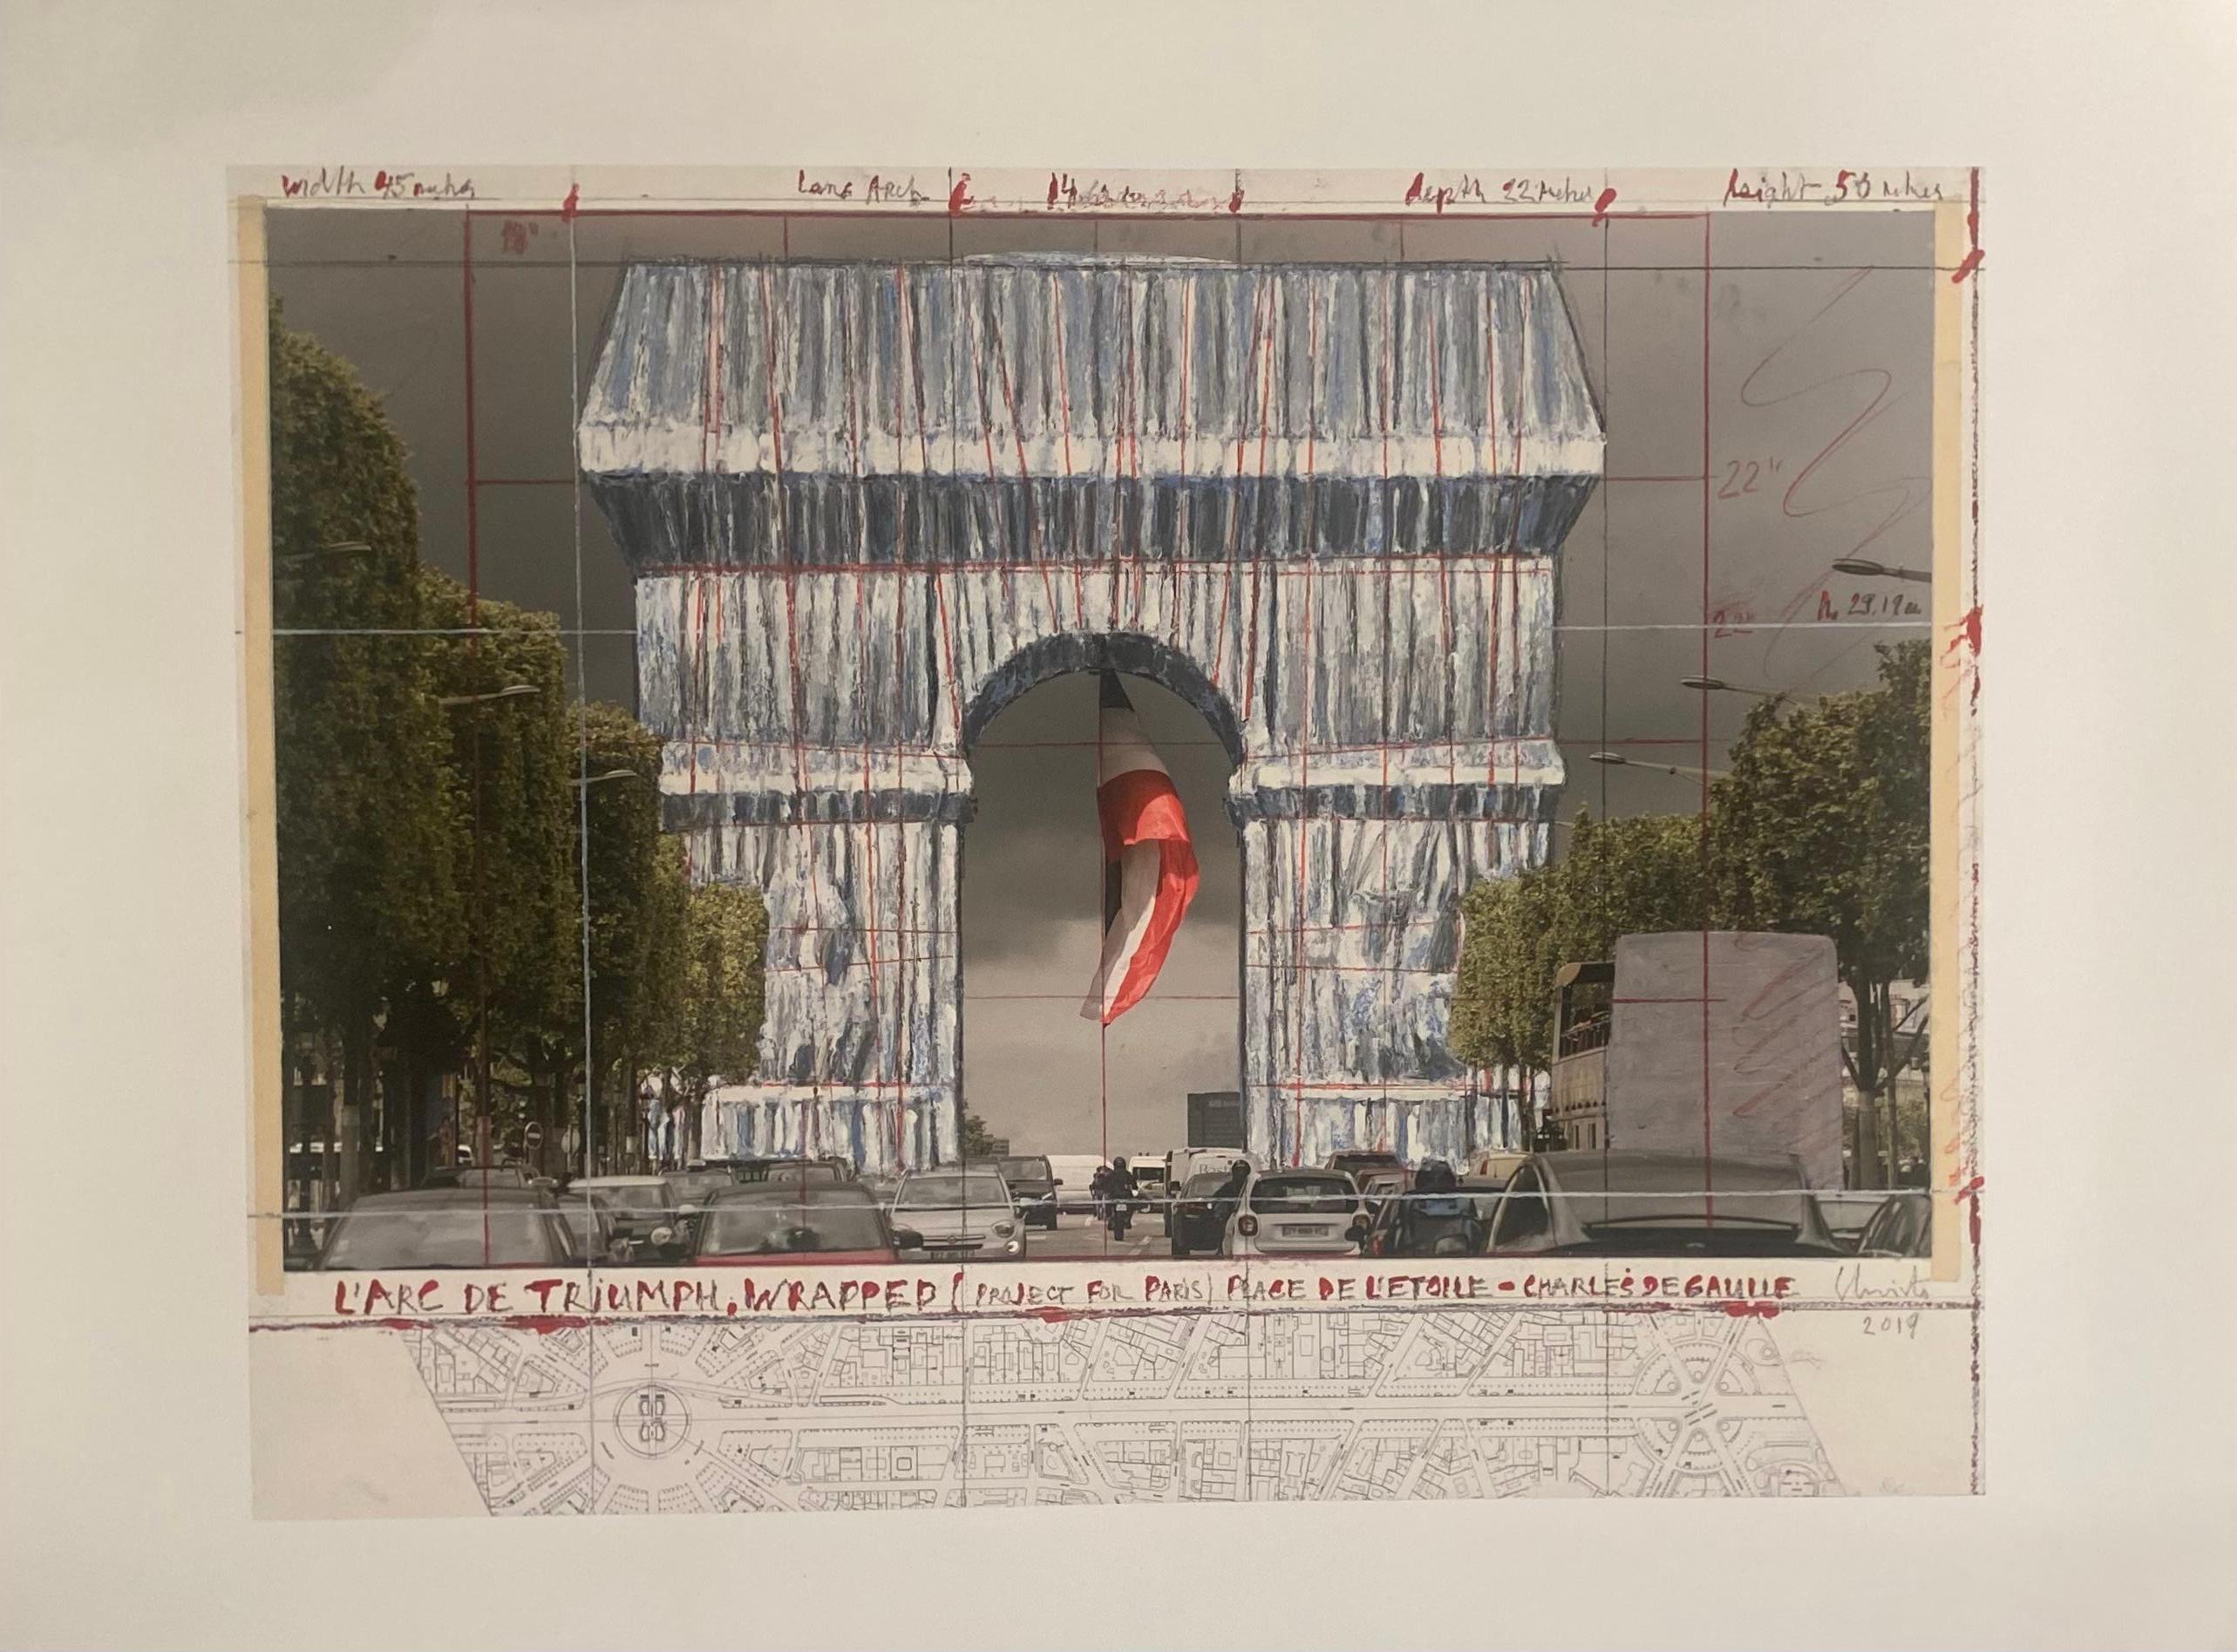 "L'arc de Triomphe, Wrapped" (Project for Paris) is a 2019 limited-edition (Edition 500) offset-lithograph by Christo (signed in the plate). The work comes beautifully framed in a white wooden frame and passpartout. Framing options available. It is